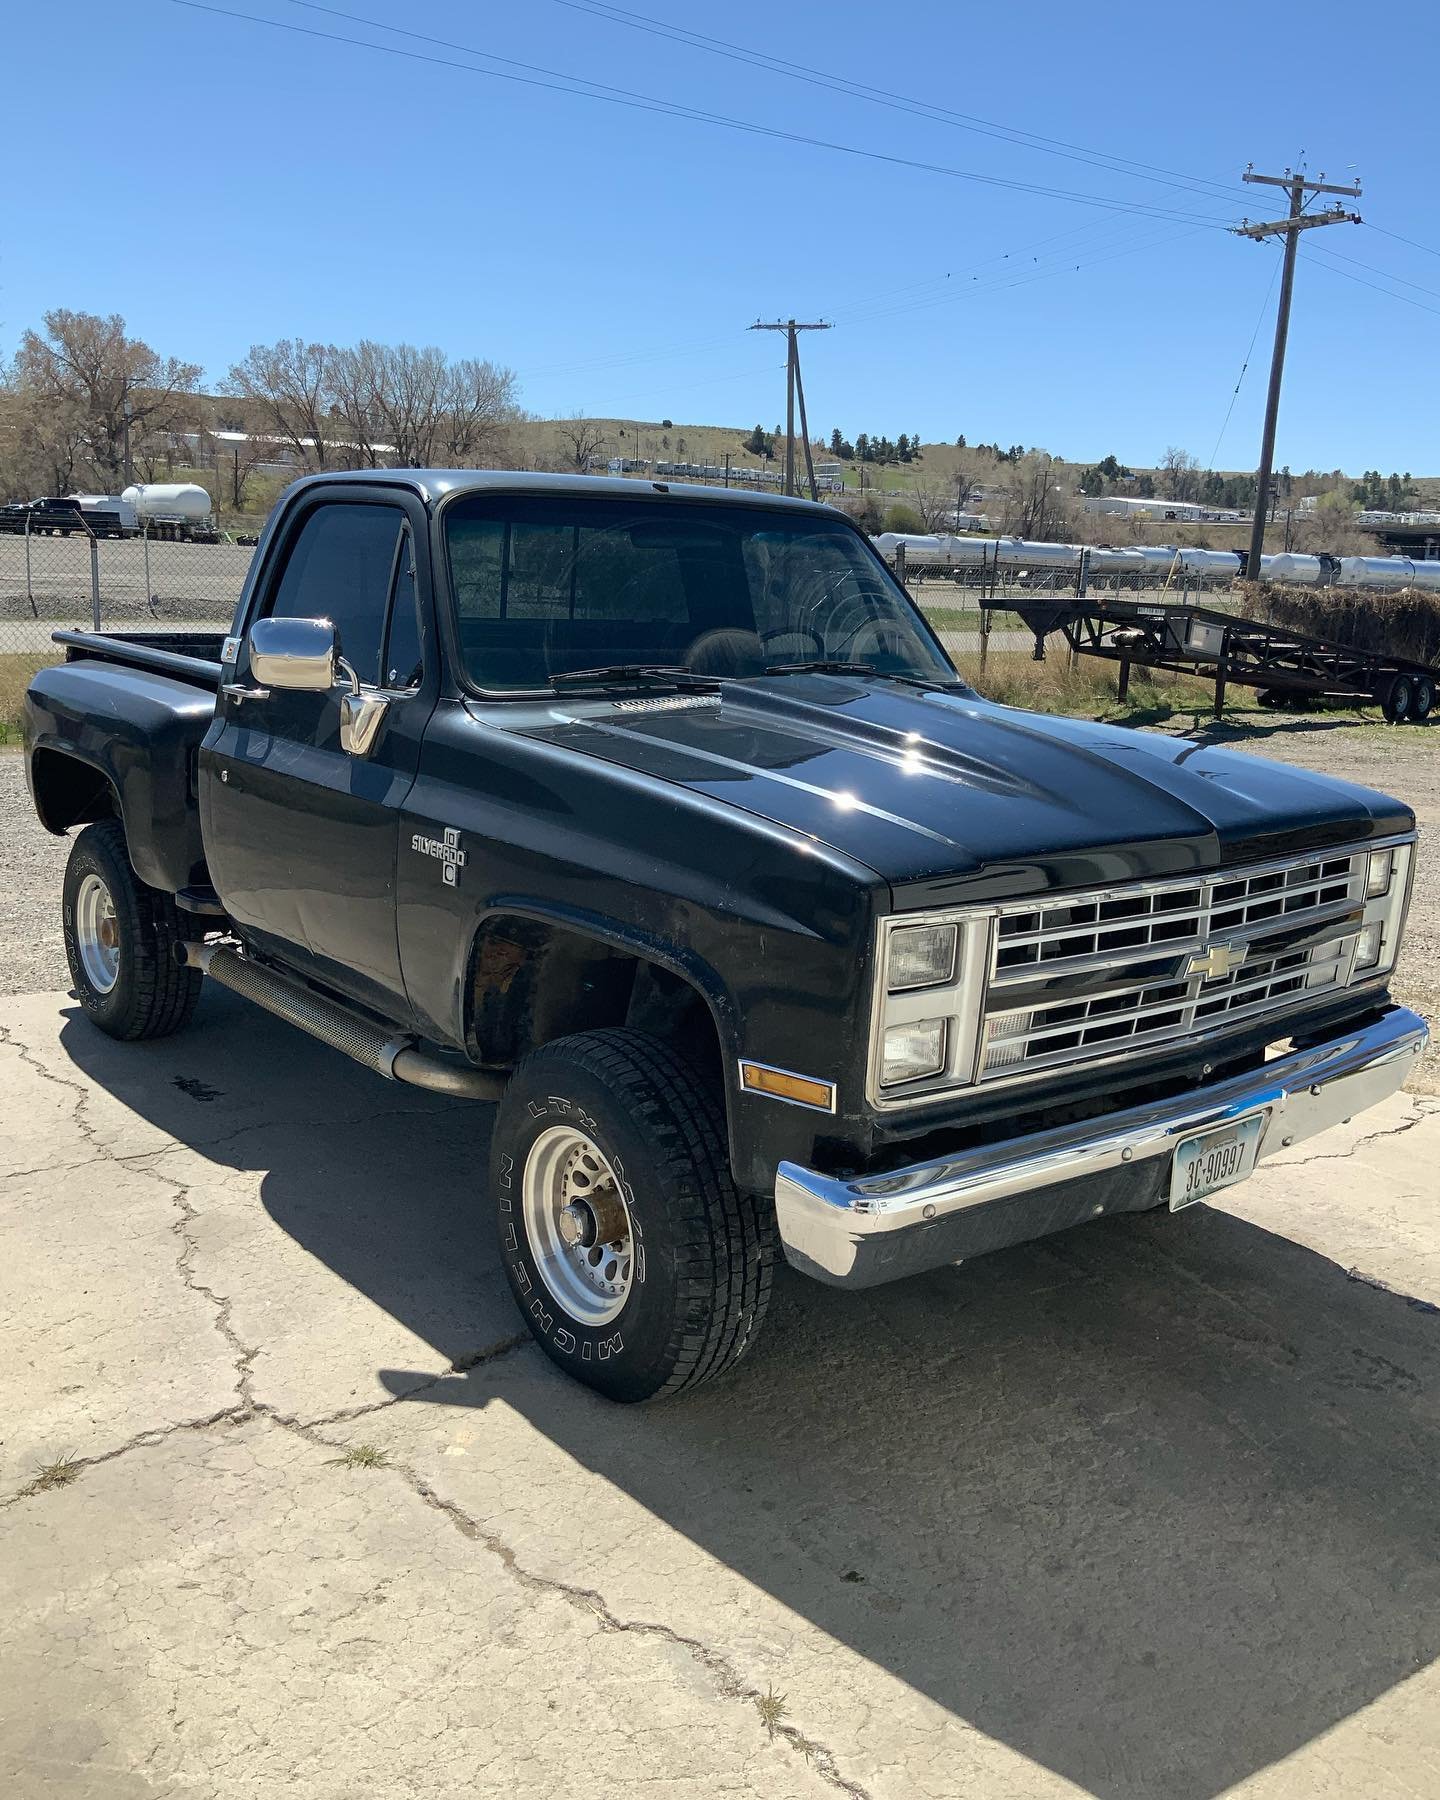 1987 Chevy stepside short box just found in storage and it&rsquo;s up for sale call the Art Garage 406671-7132 and leave a msg more pics on Facebook the Art garage. #chevytrucks #stepsidechevy #1987chevy #Artgargage